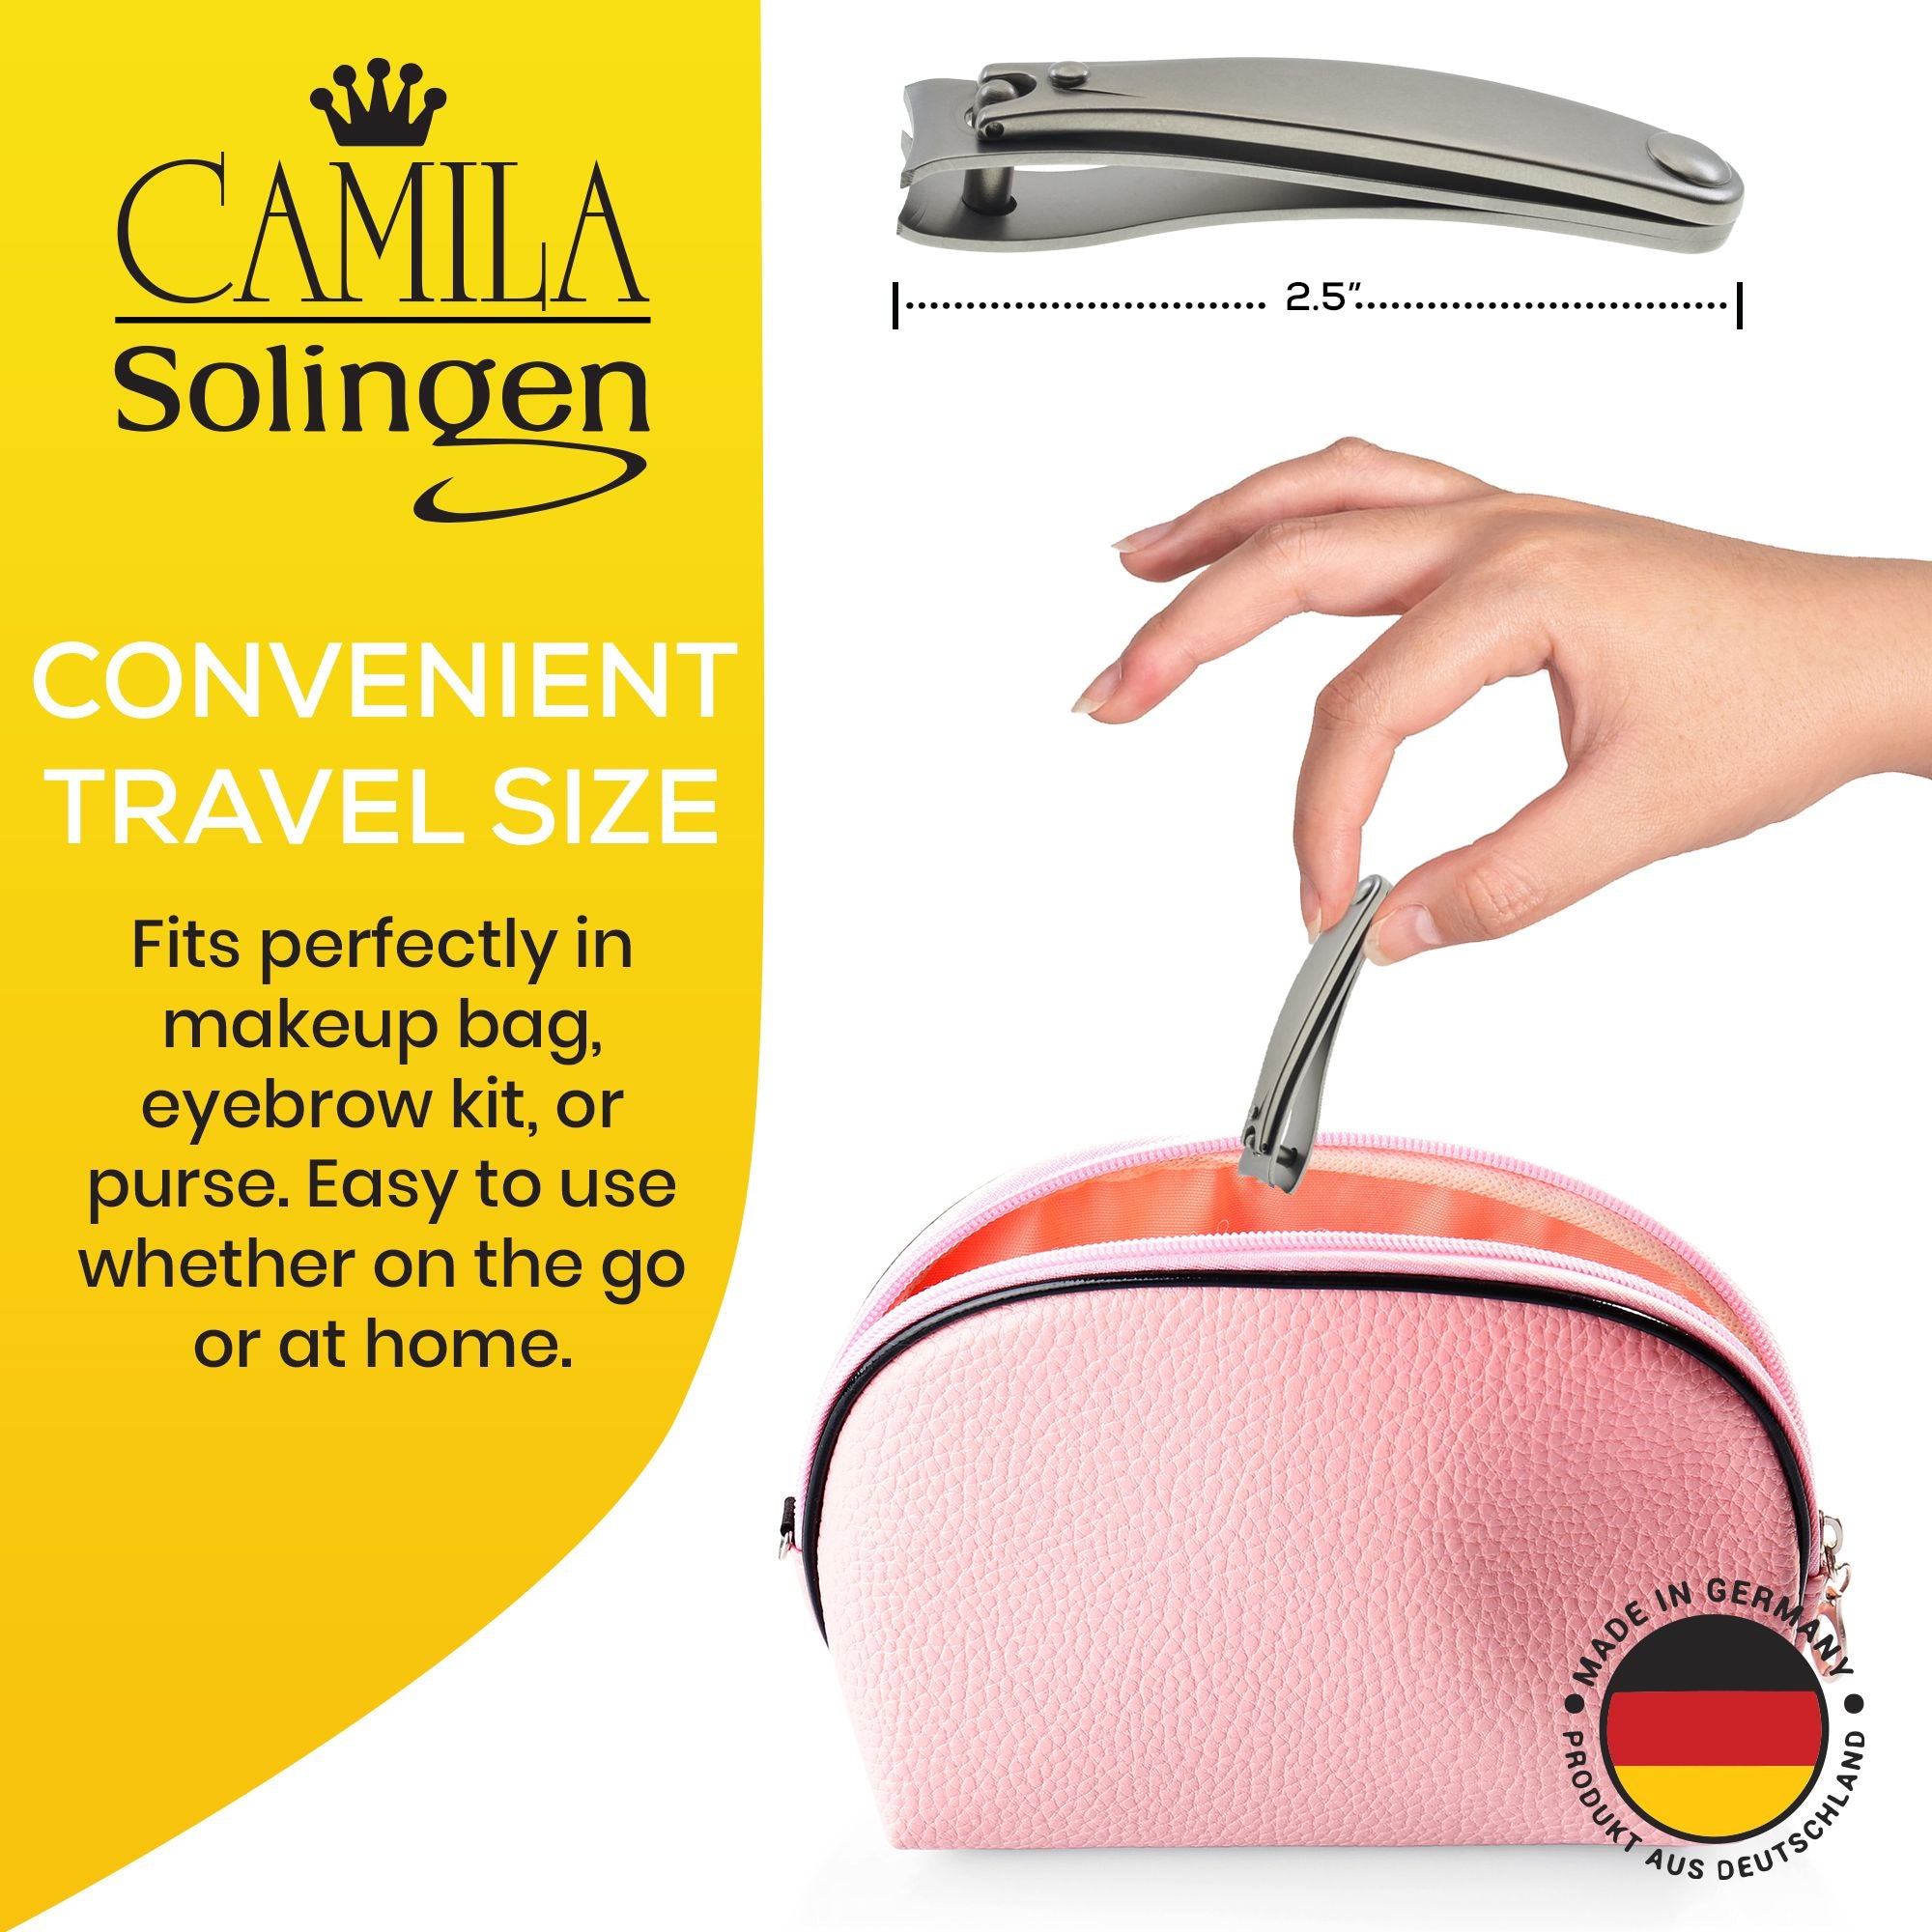 Camila Solingen CS08 4 Professional Nail Cuticle Trimmer from